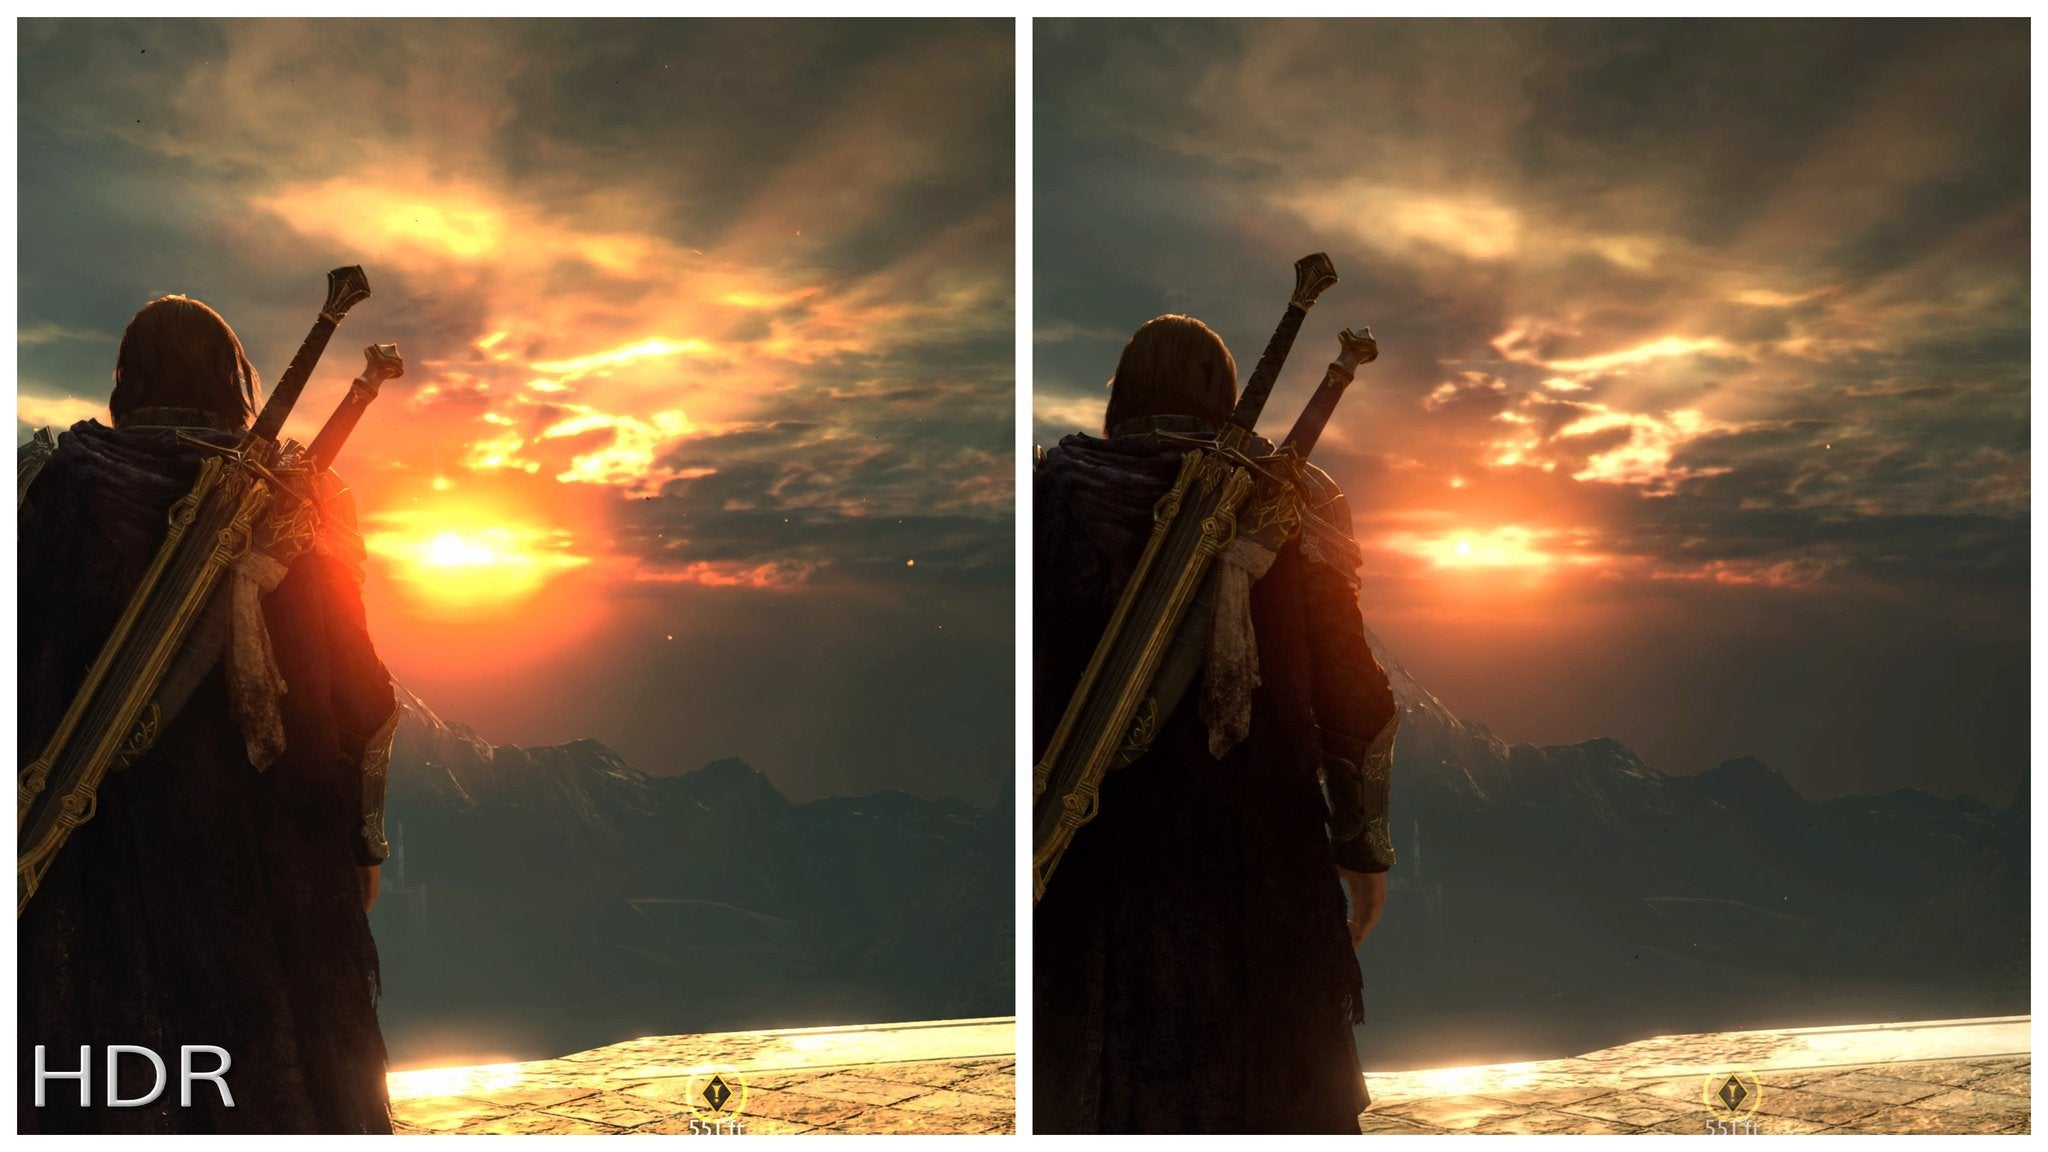 The difference between HDR and Standard on PS4 Pro ...